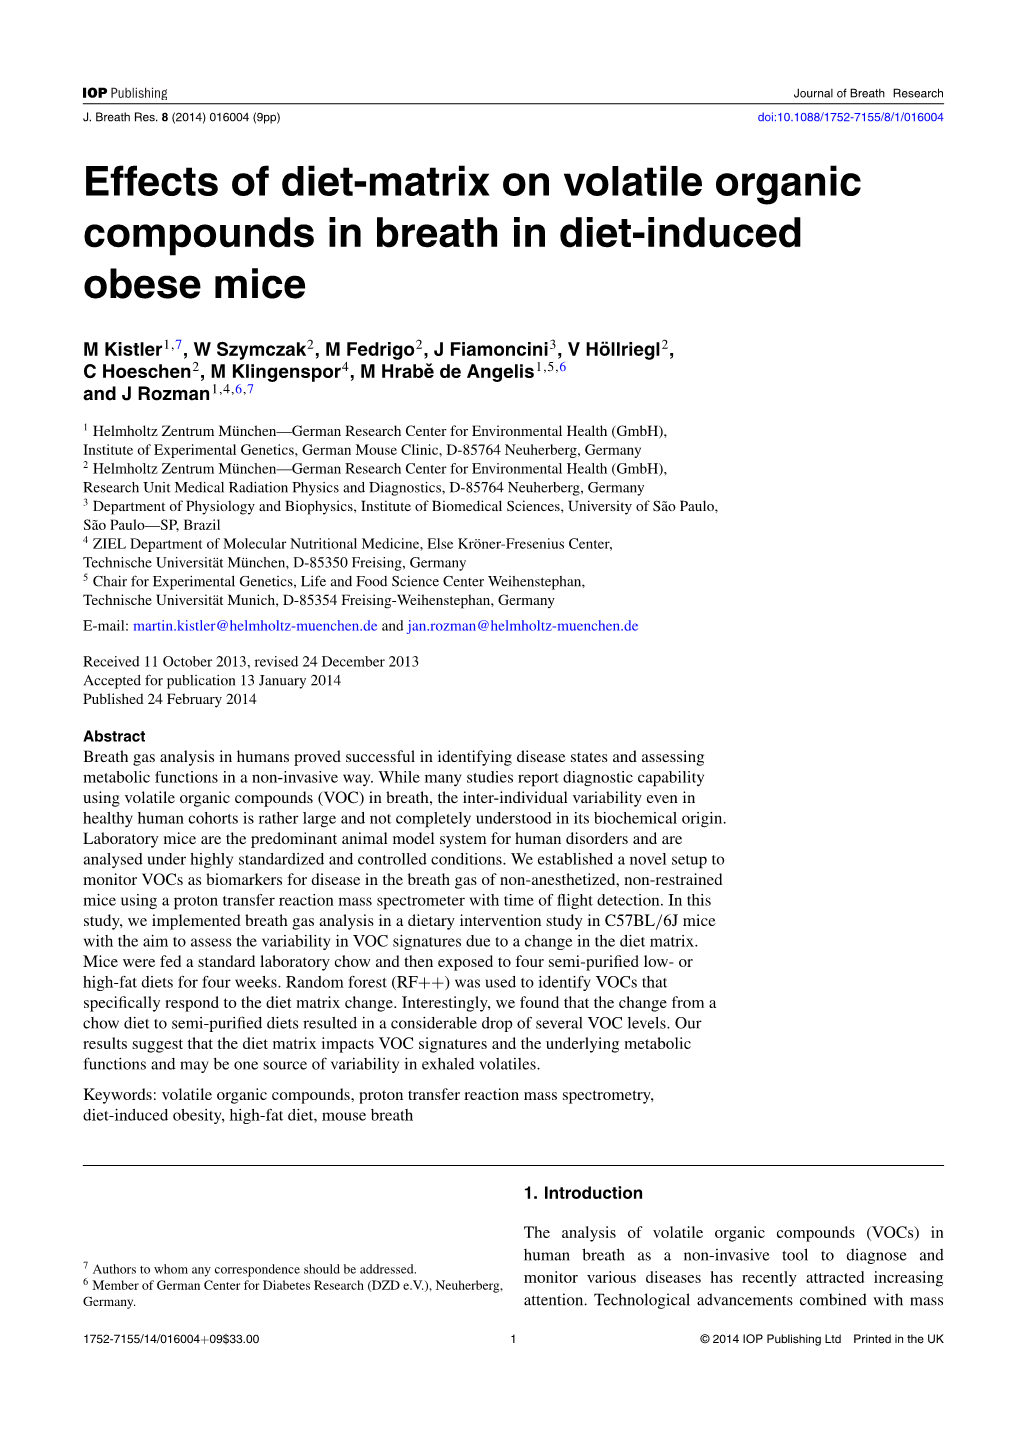 Effects of Diet-Matrix on Volatile Organic Compounds in Breath in Diet-Induced Obese Mice